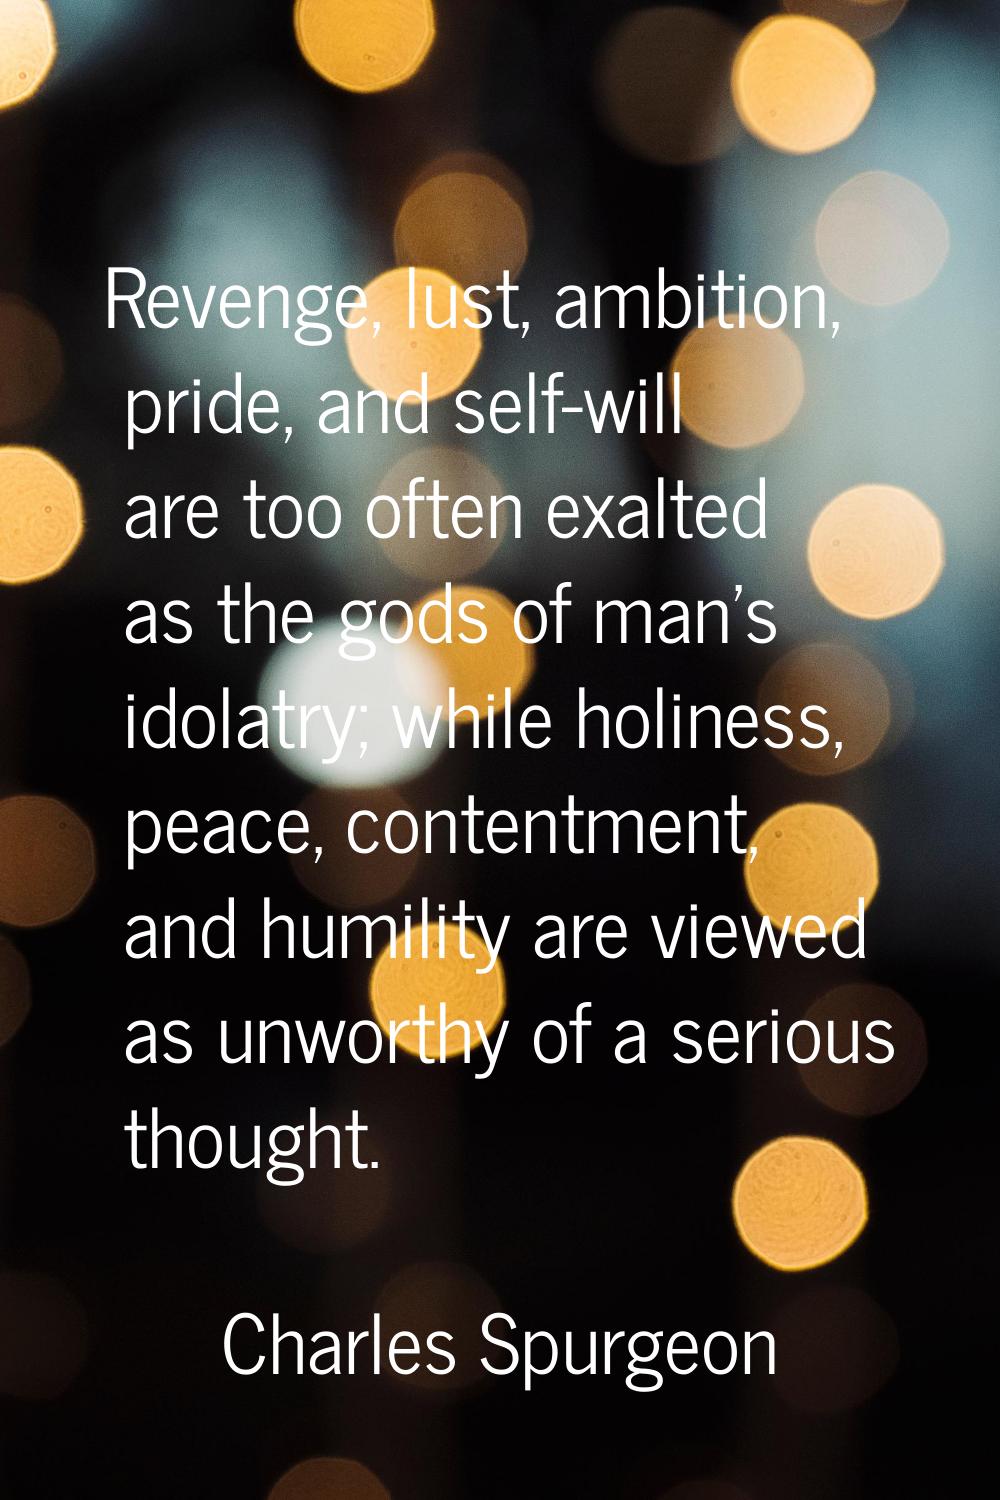 Revenge, lust, ambition, pride, and self-will are too often exalted as the gods of man's idolatry; 